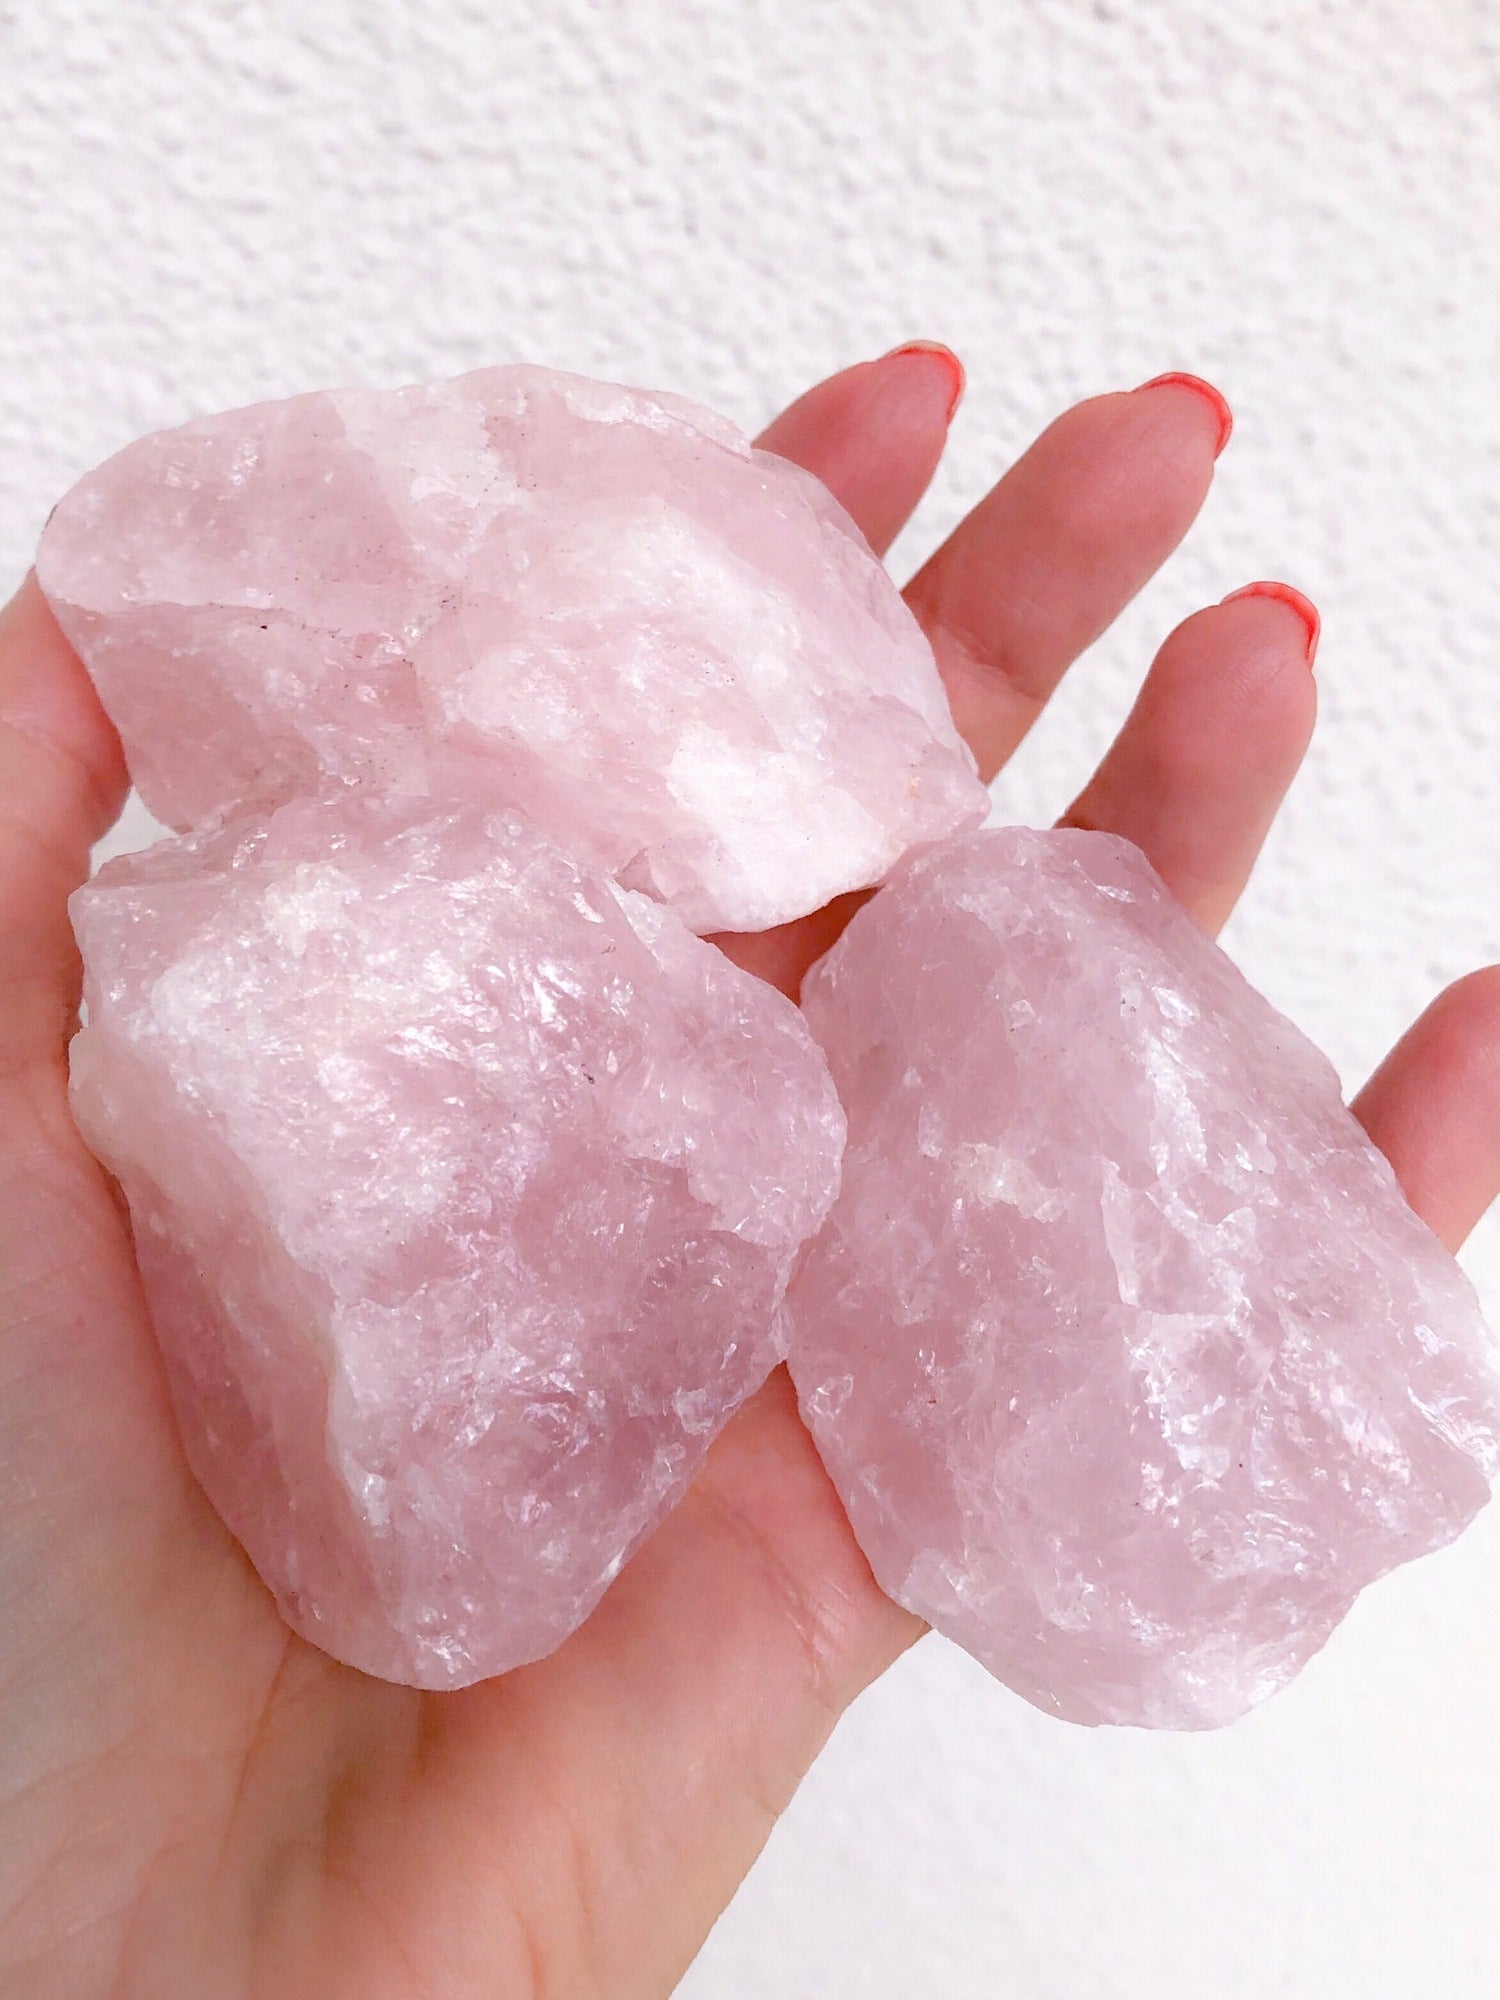 Light it up with our top 3 crystals to attract love